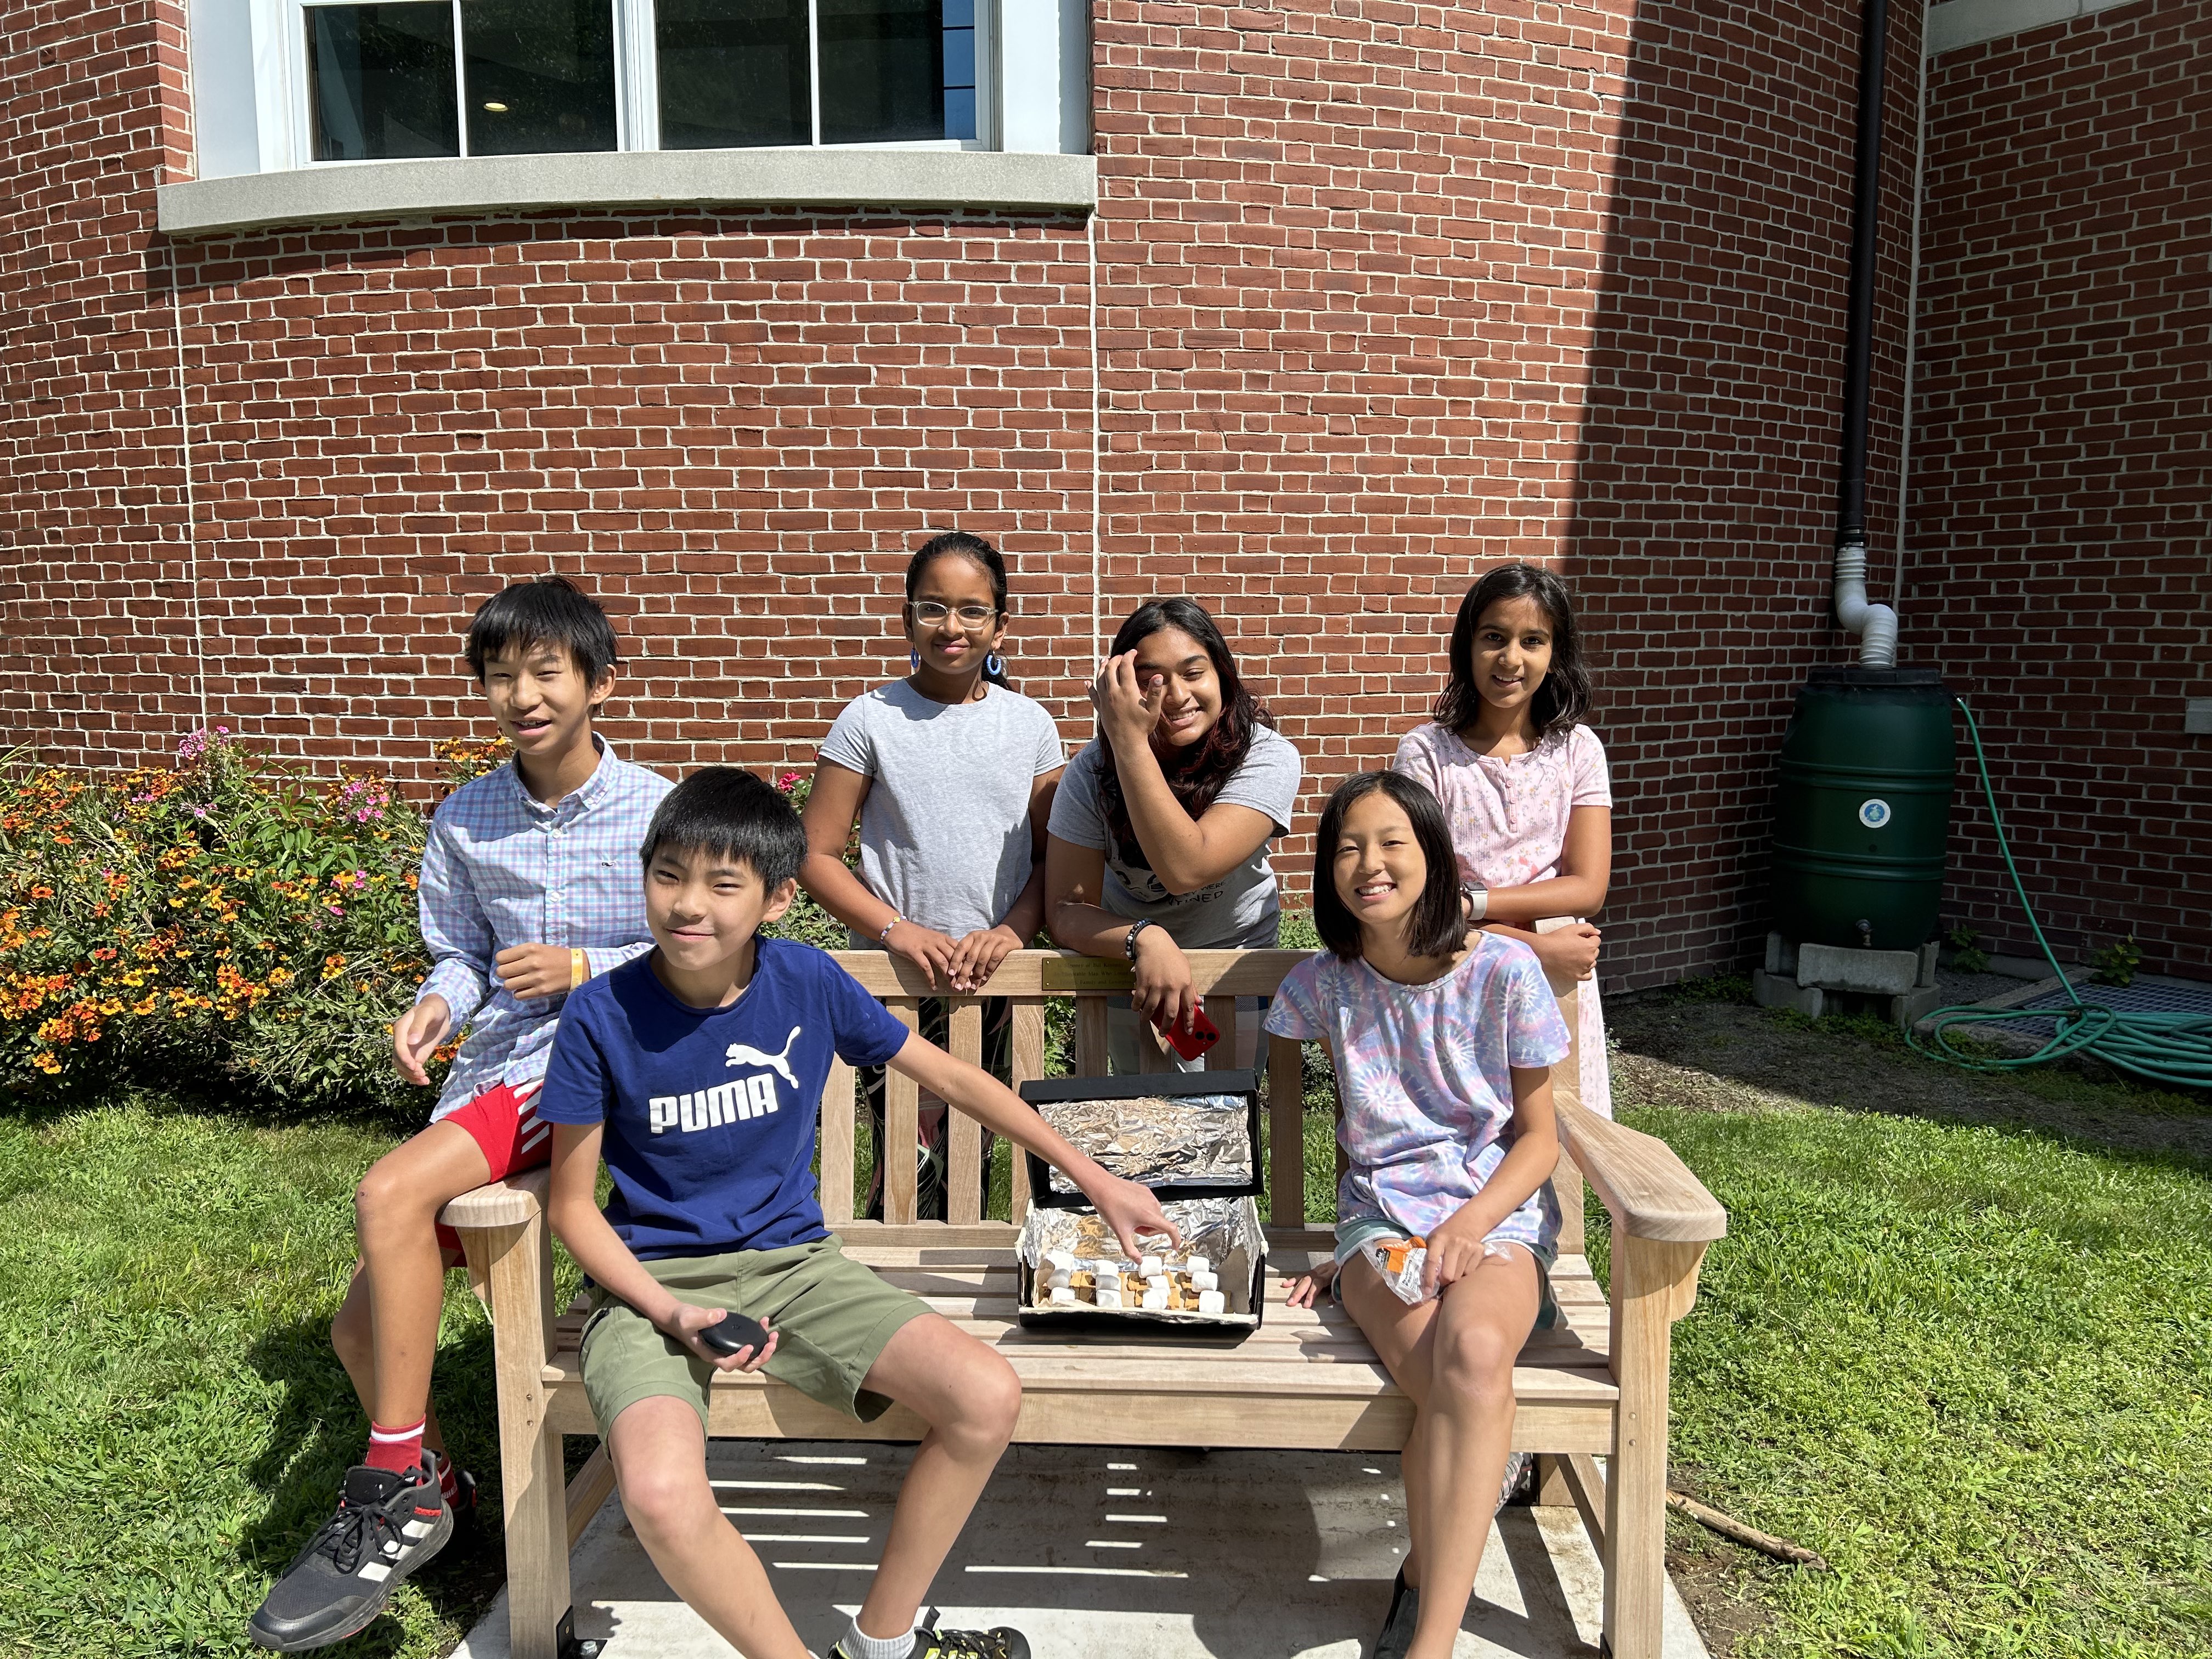 Students sitting on a bench, happy that they participated in Science Outdoors Season 3!